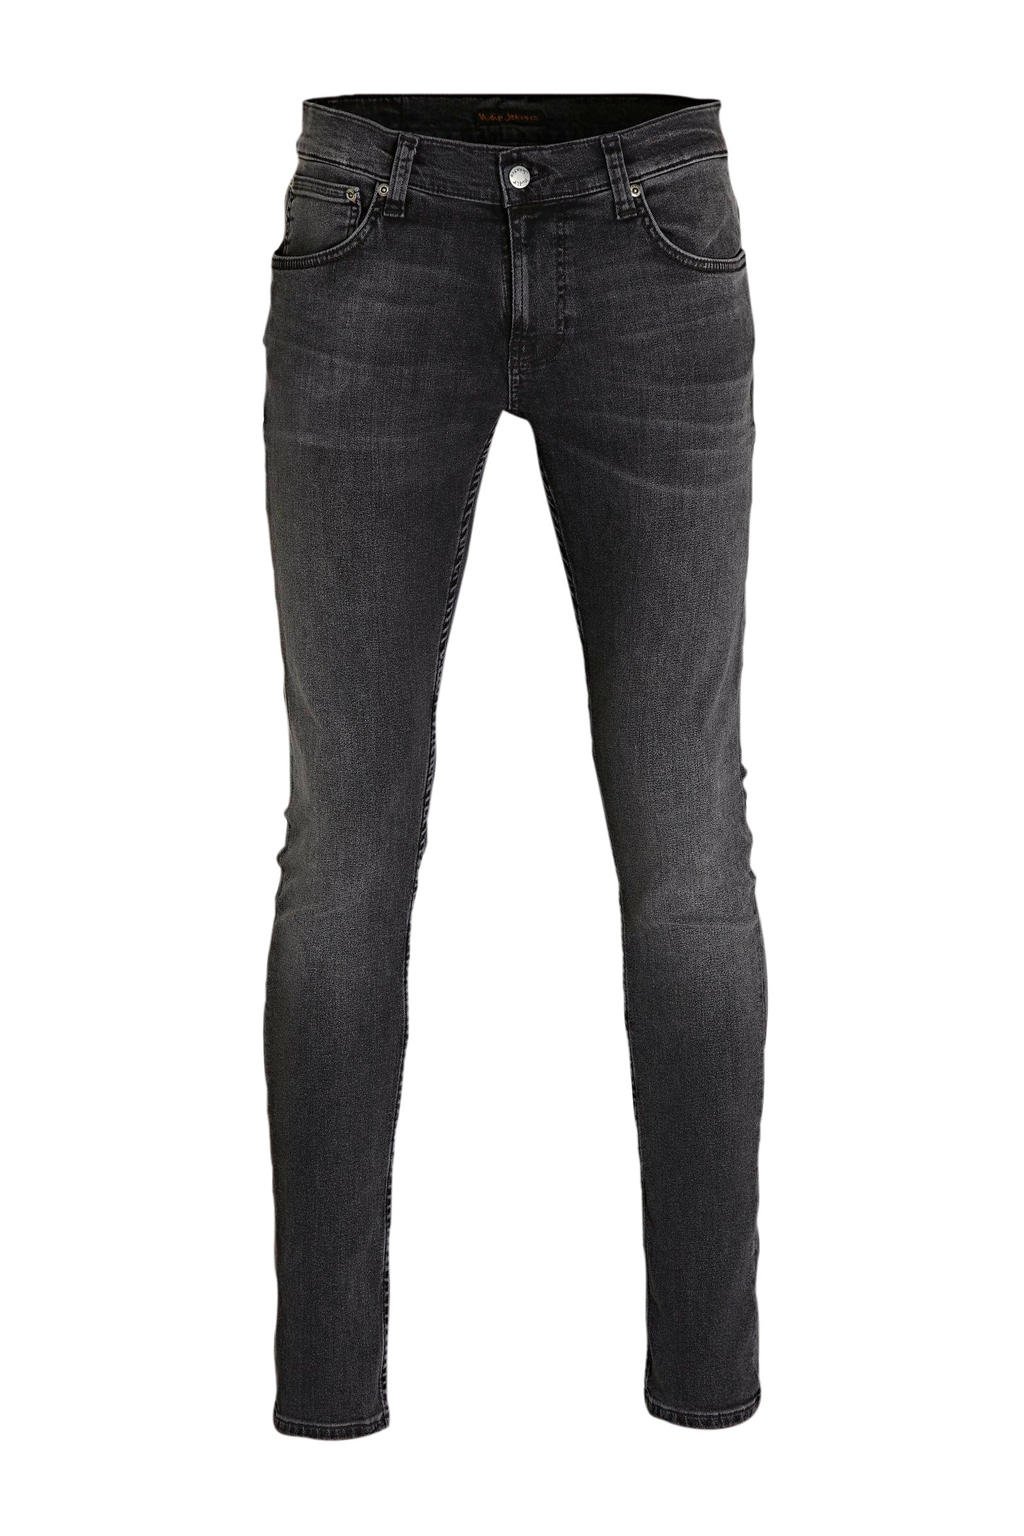 Nudie Jeans skinny fit jeans Tight Terry fade to grey